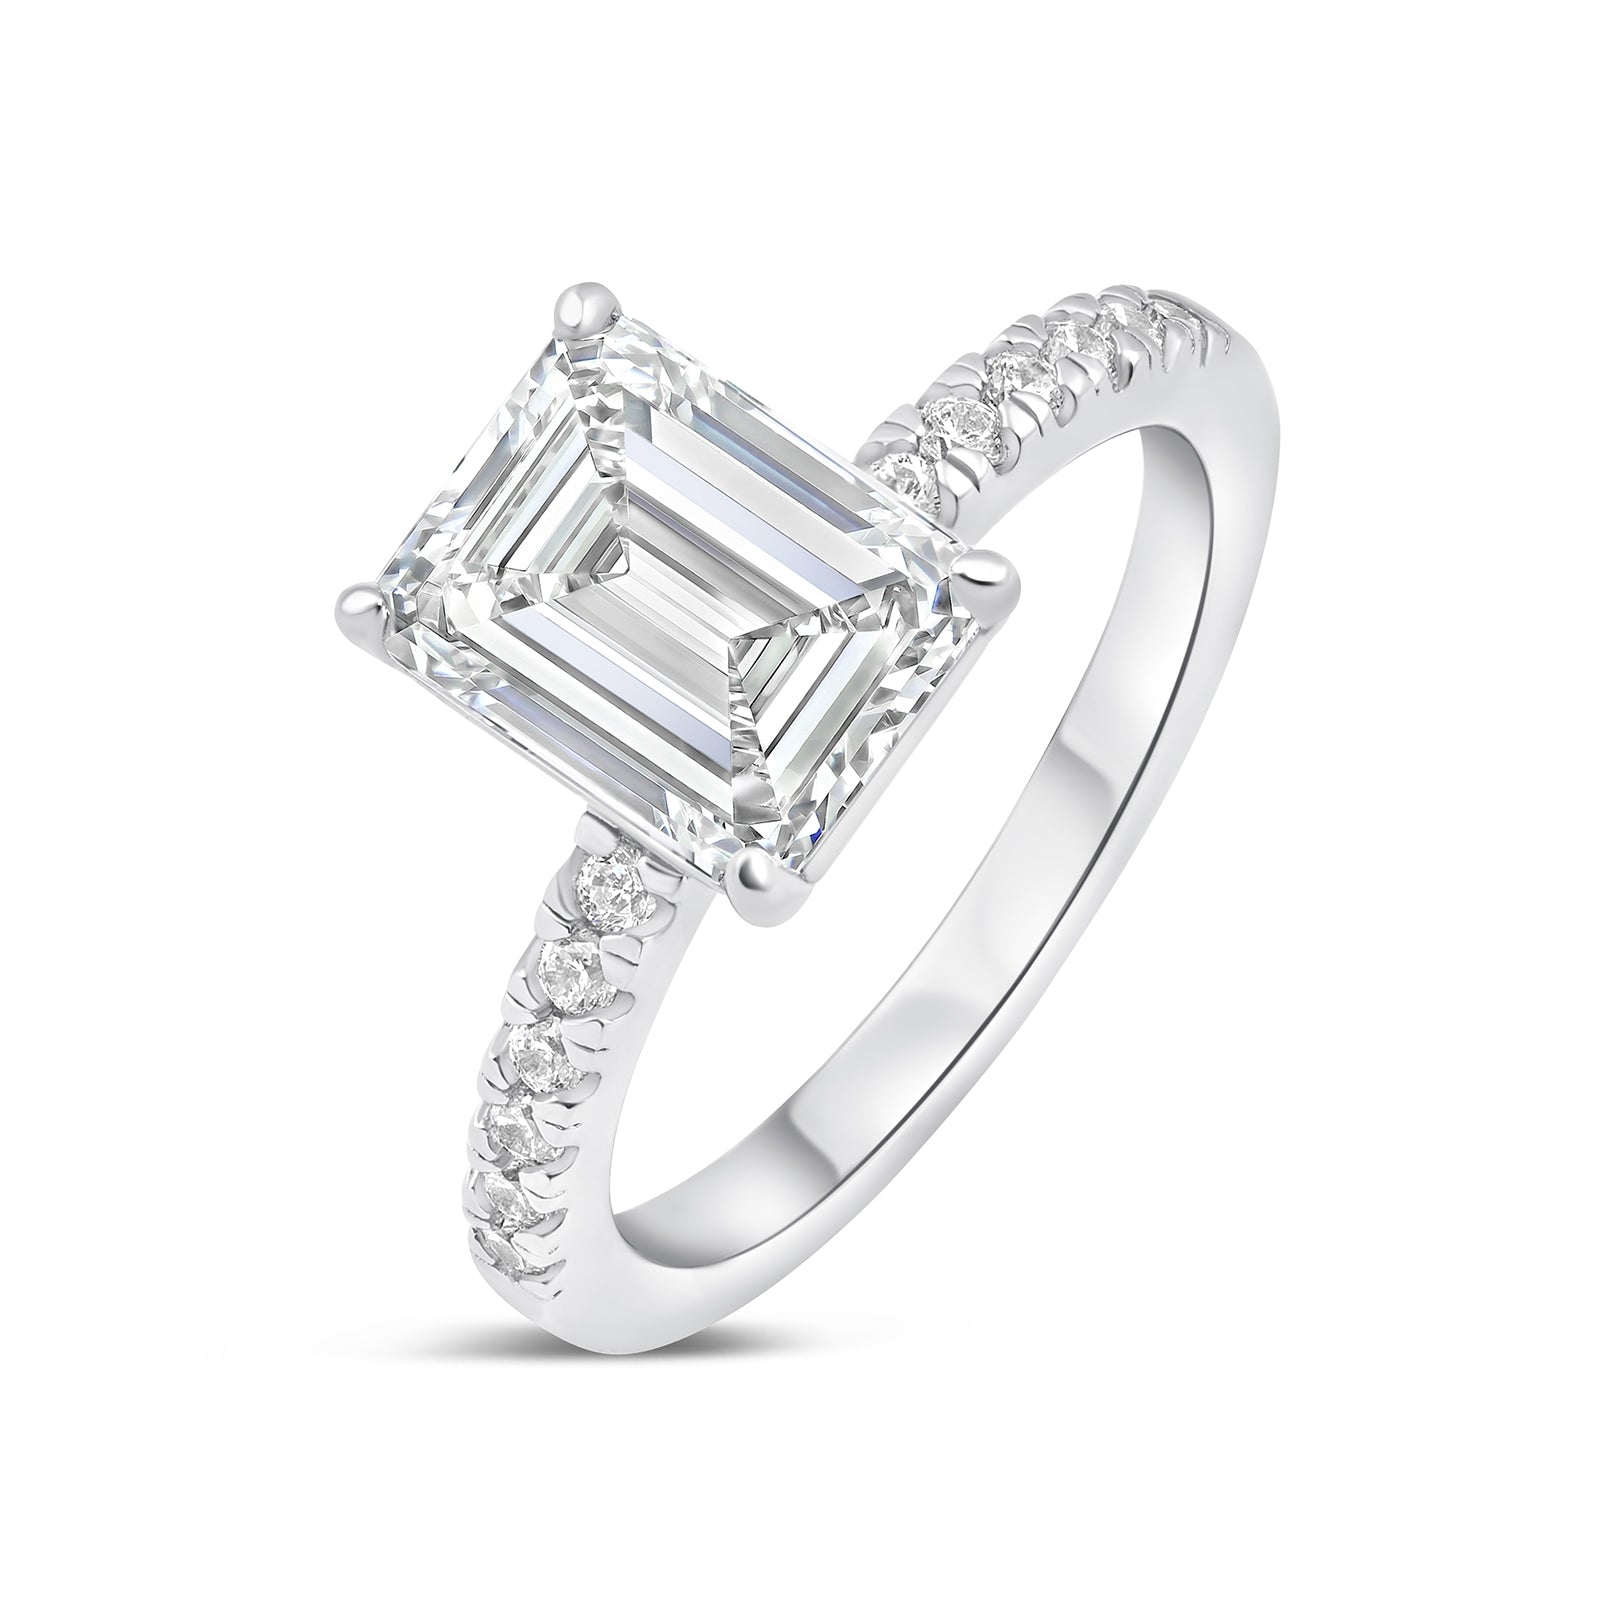 silver 3 carat emerald cut engagement ring with half eternity band detail